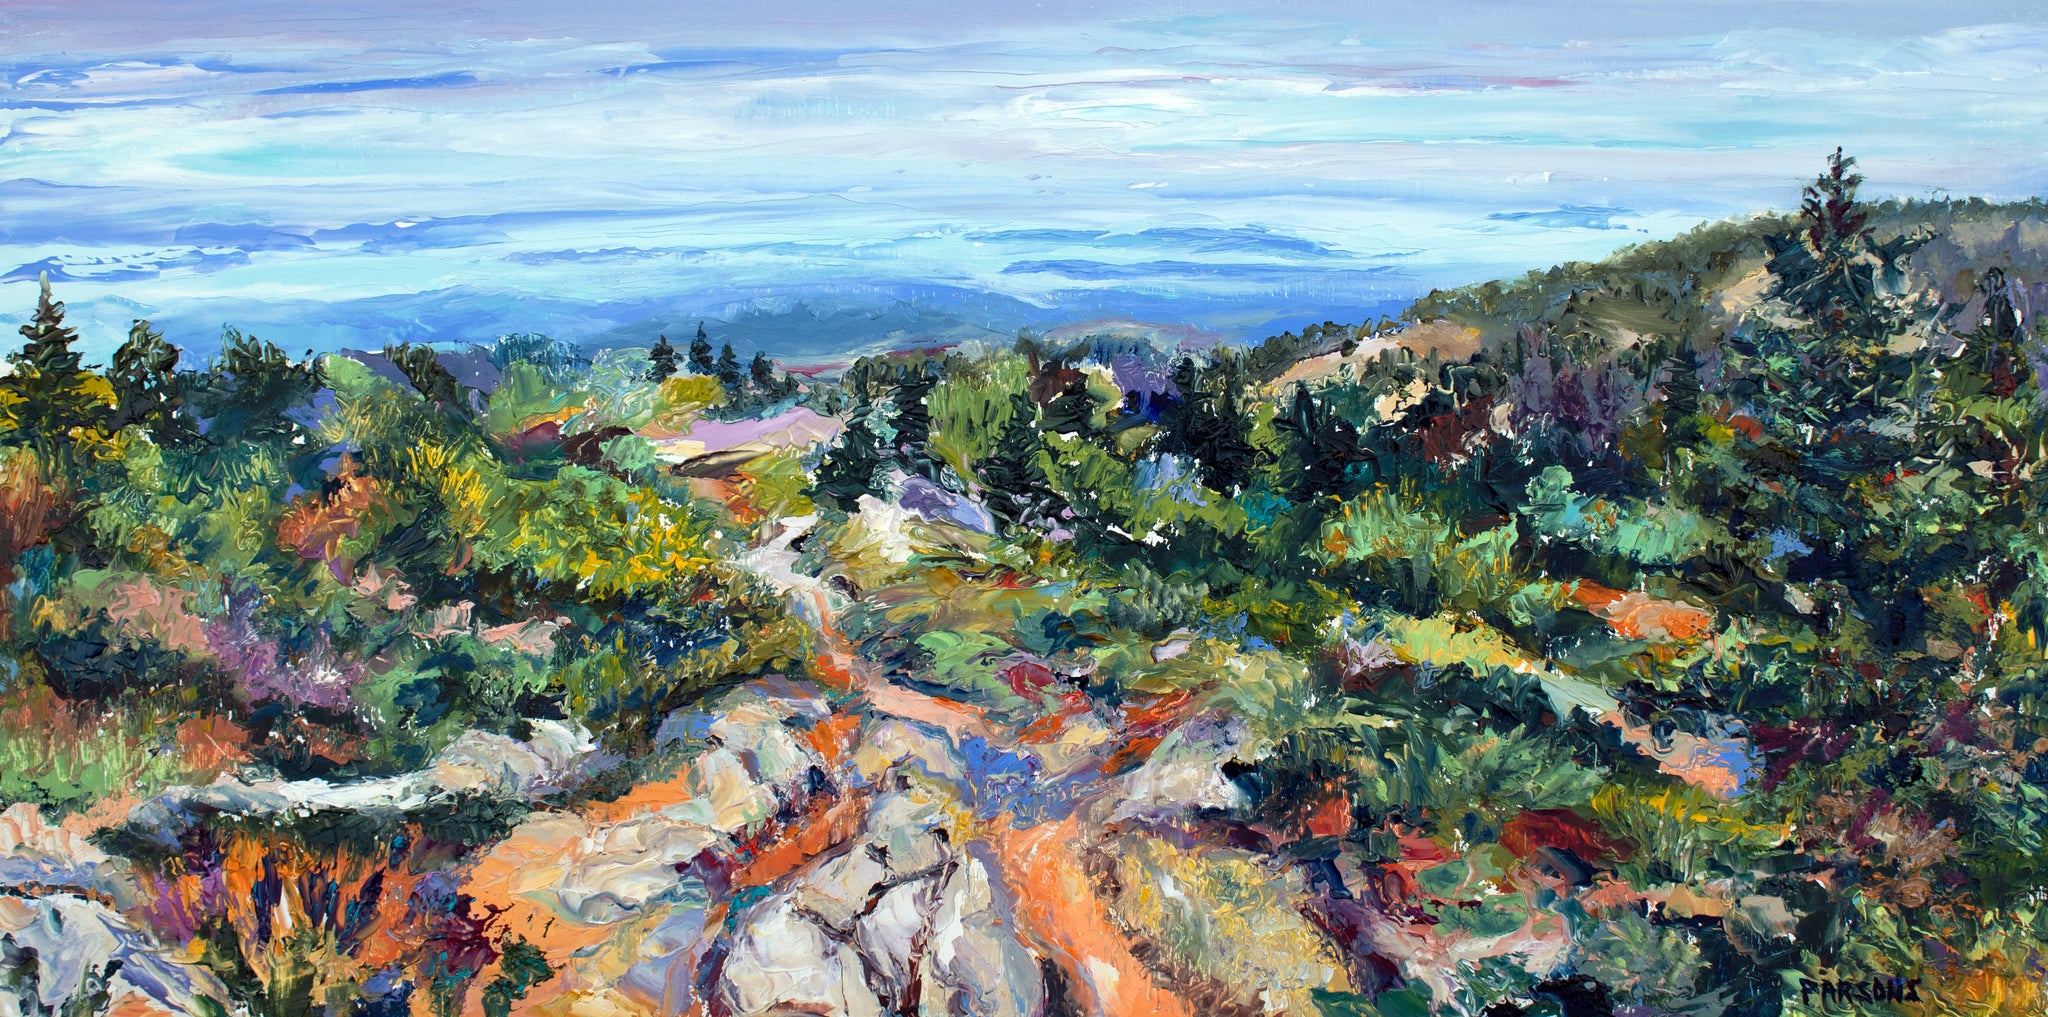 Cadillac Mountain Path. Acadia National Park, Maine. Original oil on panel painting. by Pamela Parsons